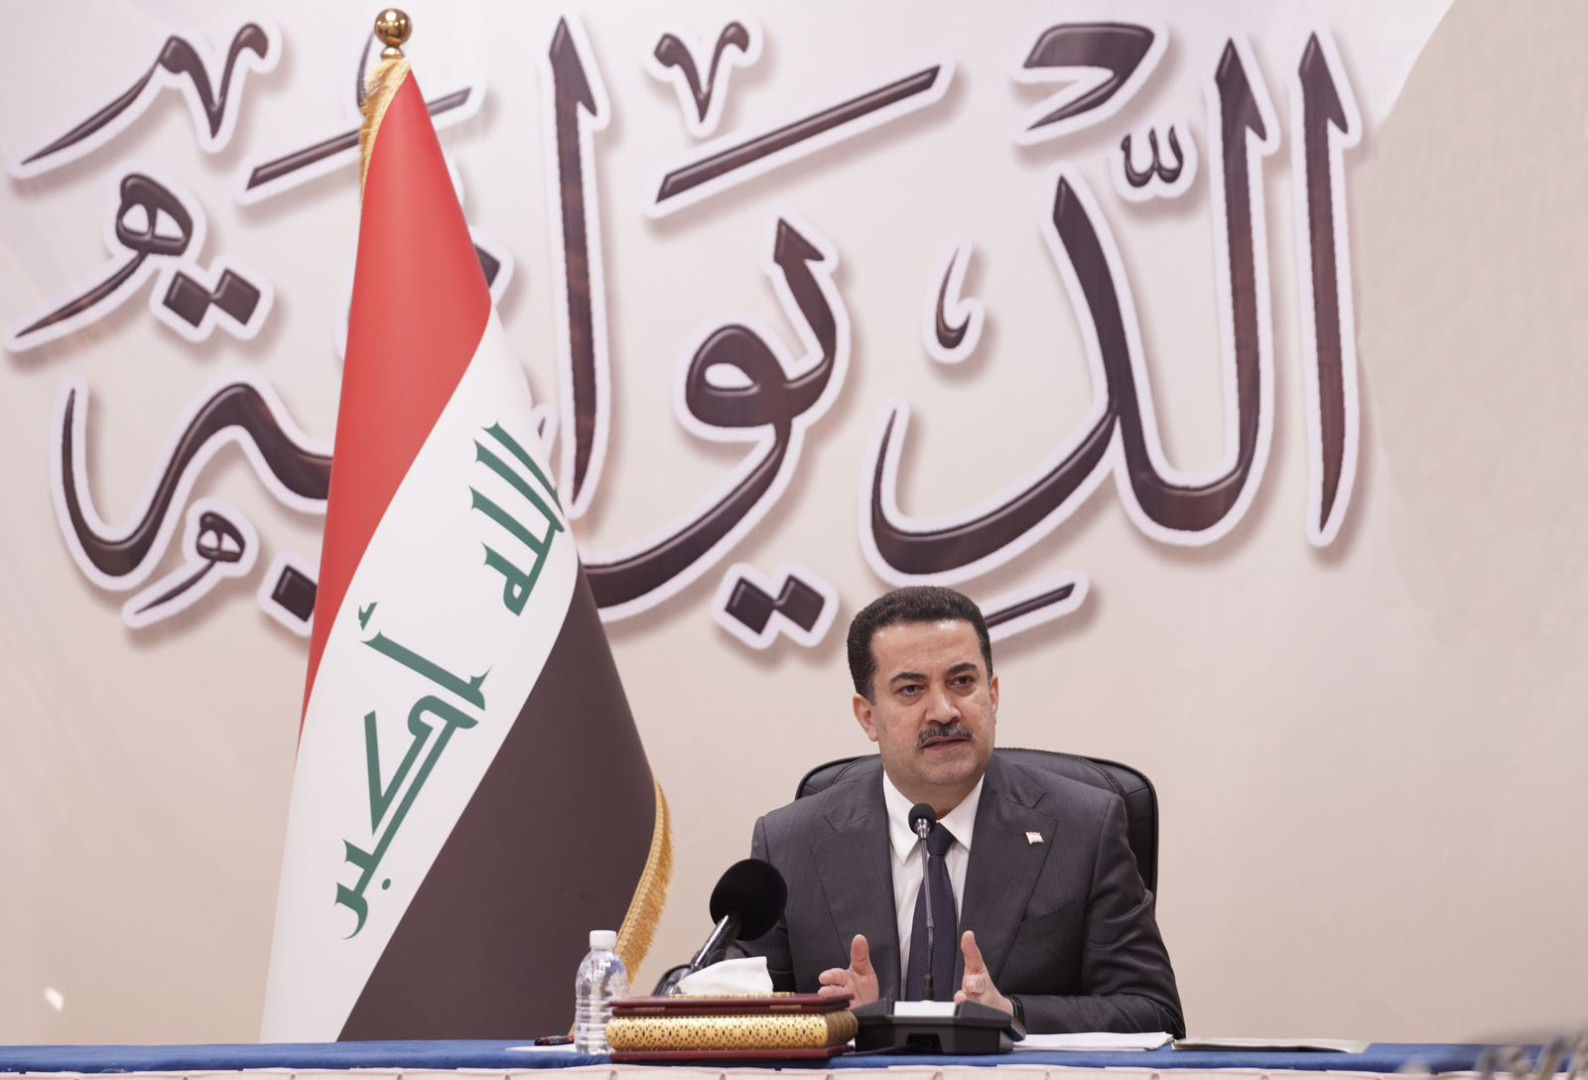 Al-Sudani outlines his cabinet's priorities during a visit to Iraq's poorest governorate 